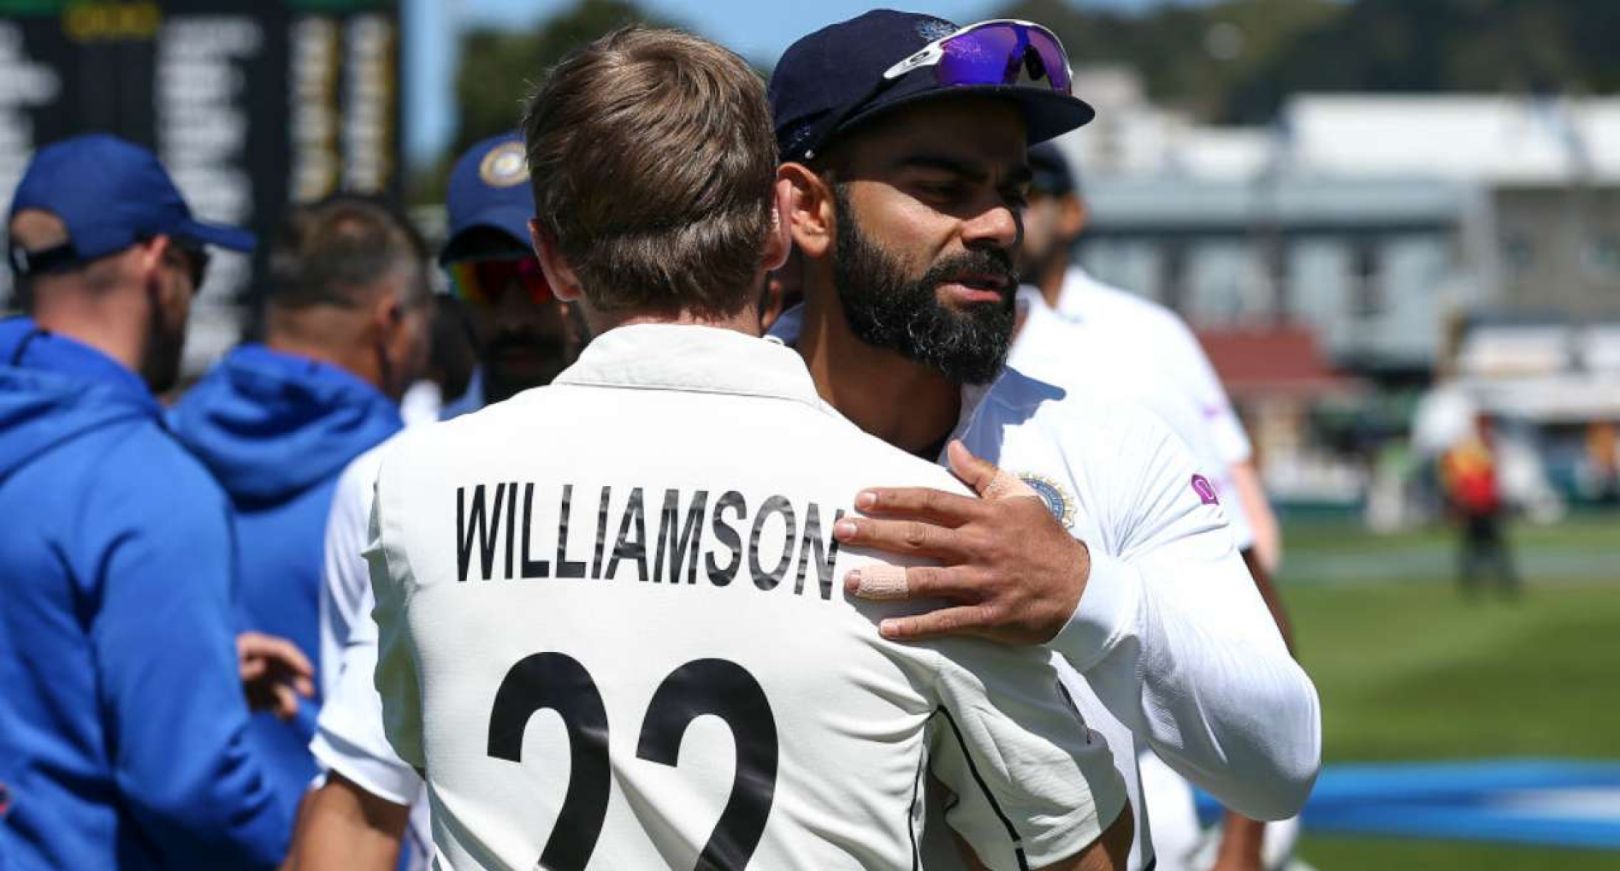 One's a go-getter, the other a slow burner: Mike Hesson on Kohli vs Kane ahead of WTC Final